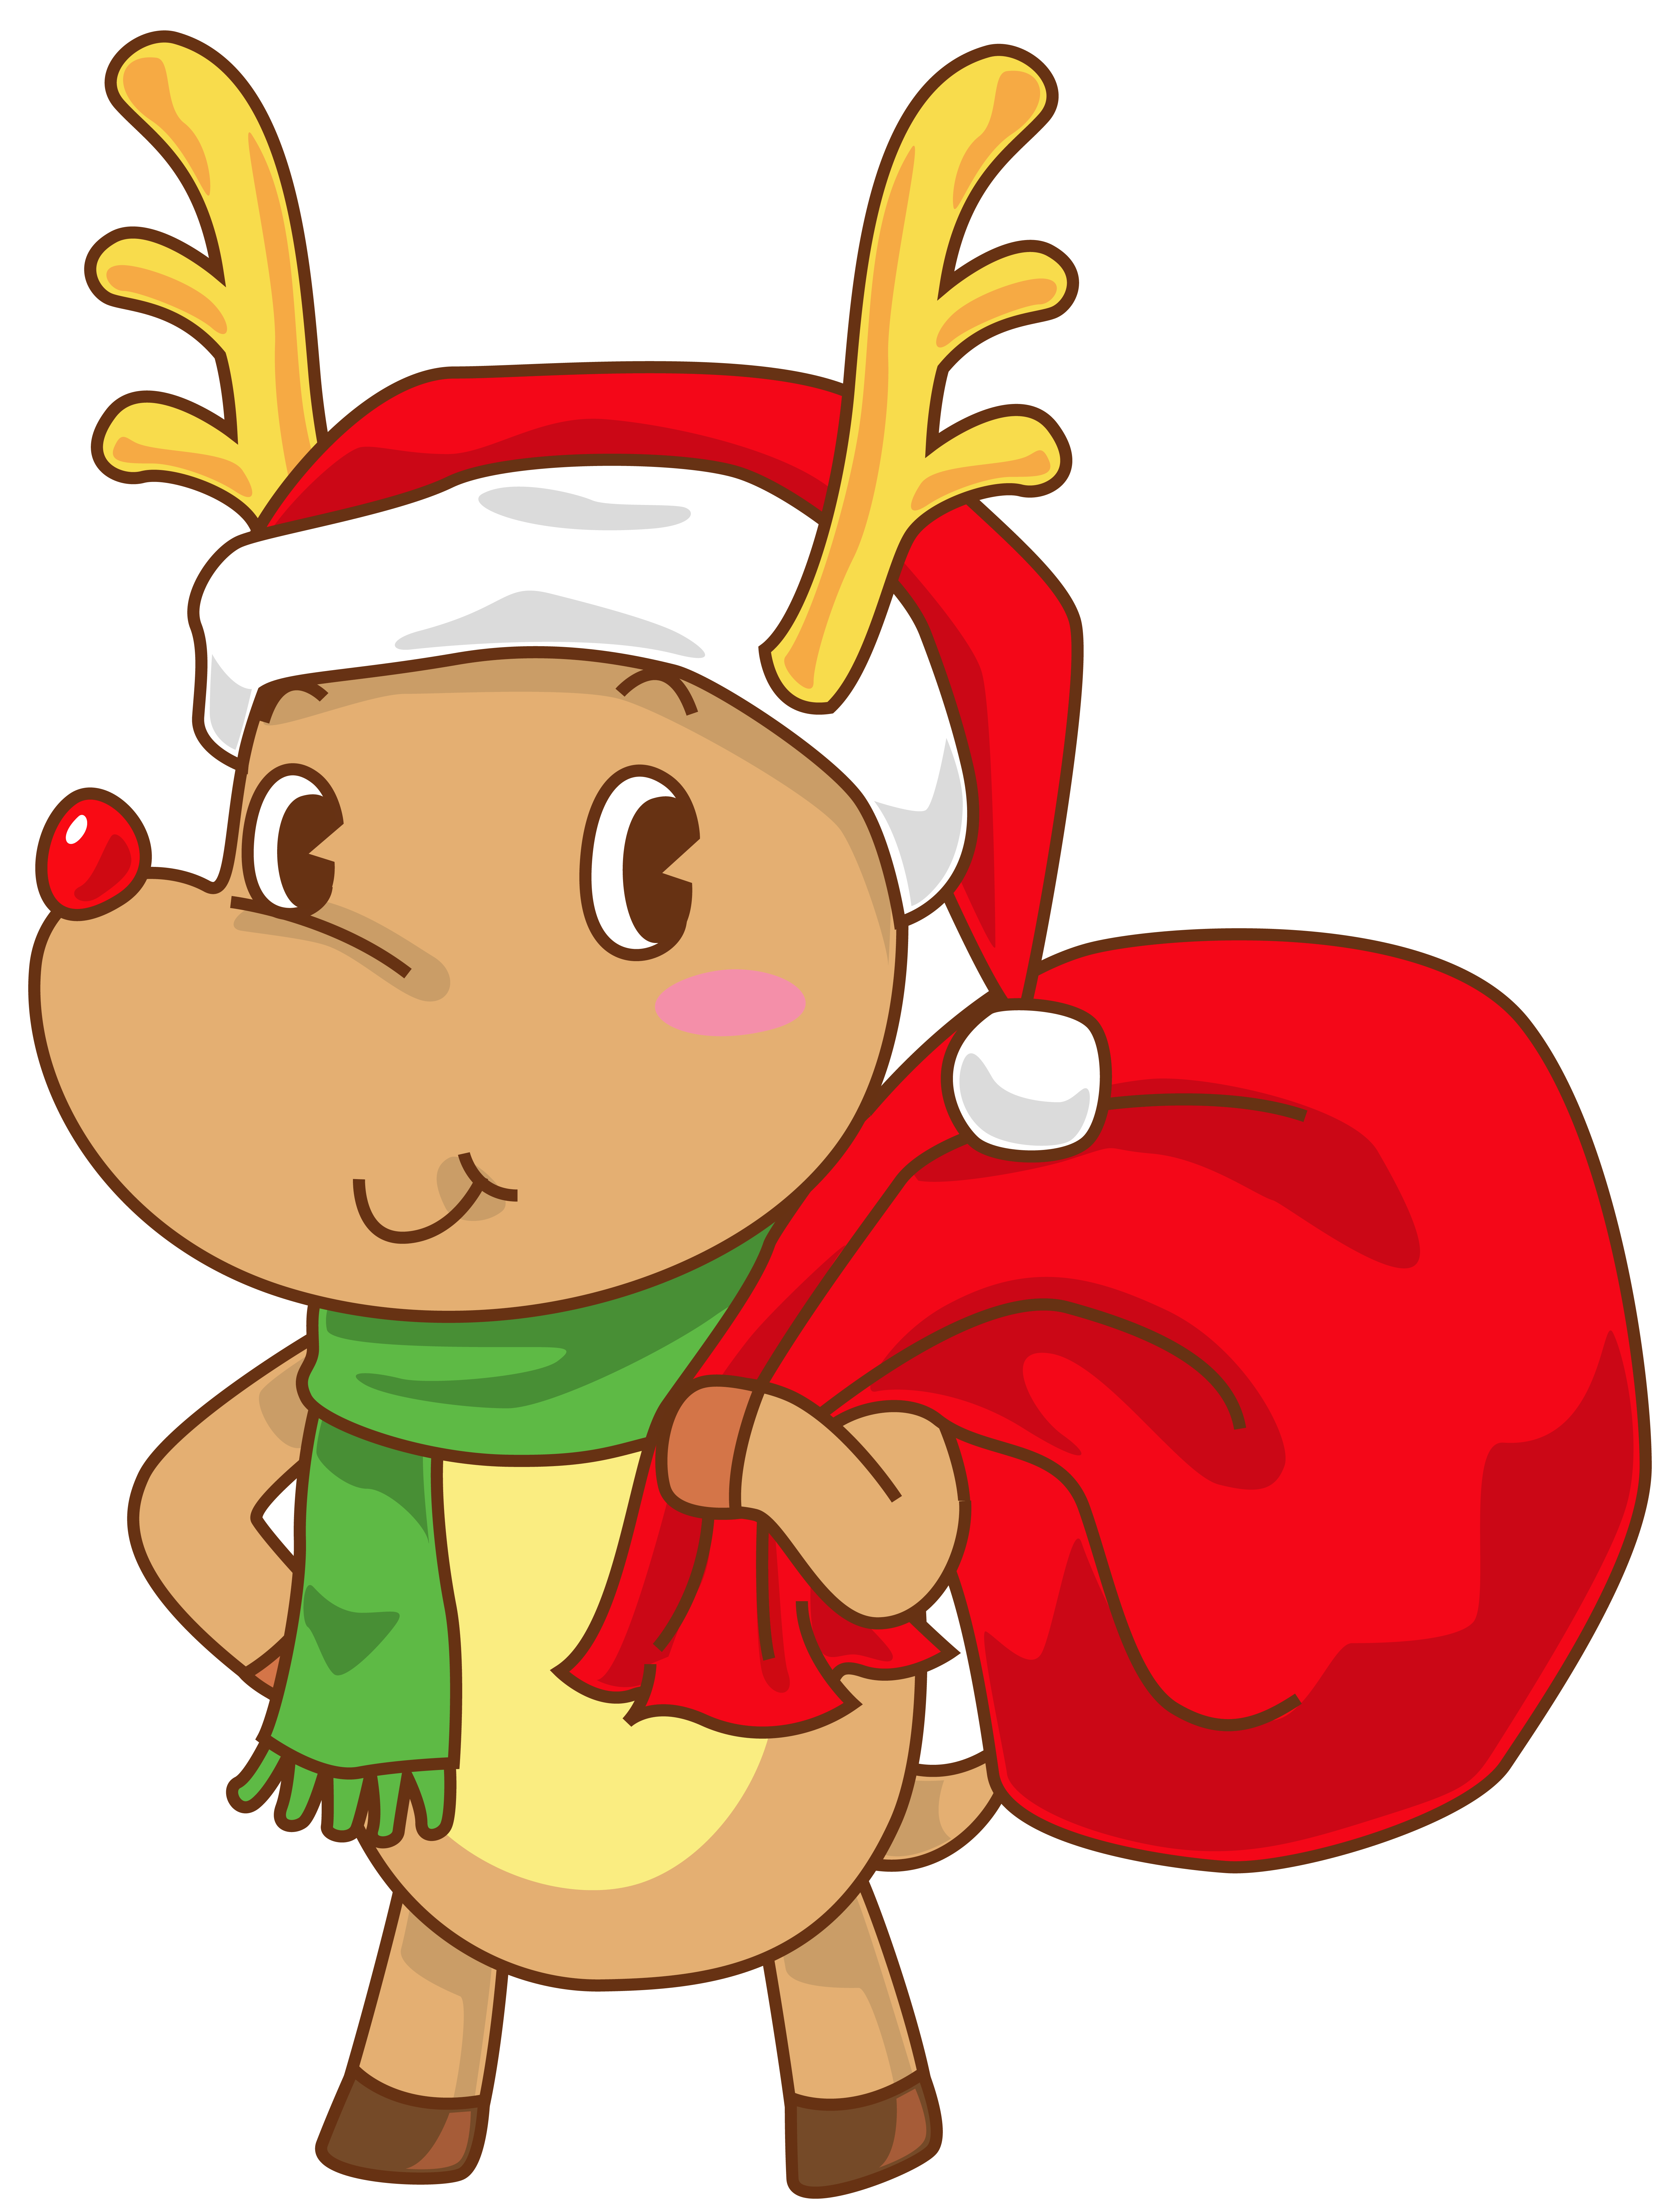 Christmas Rudolph with Santa Hat Transparent PNG Clip Art Image